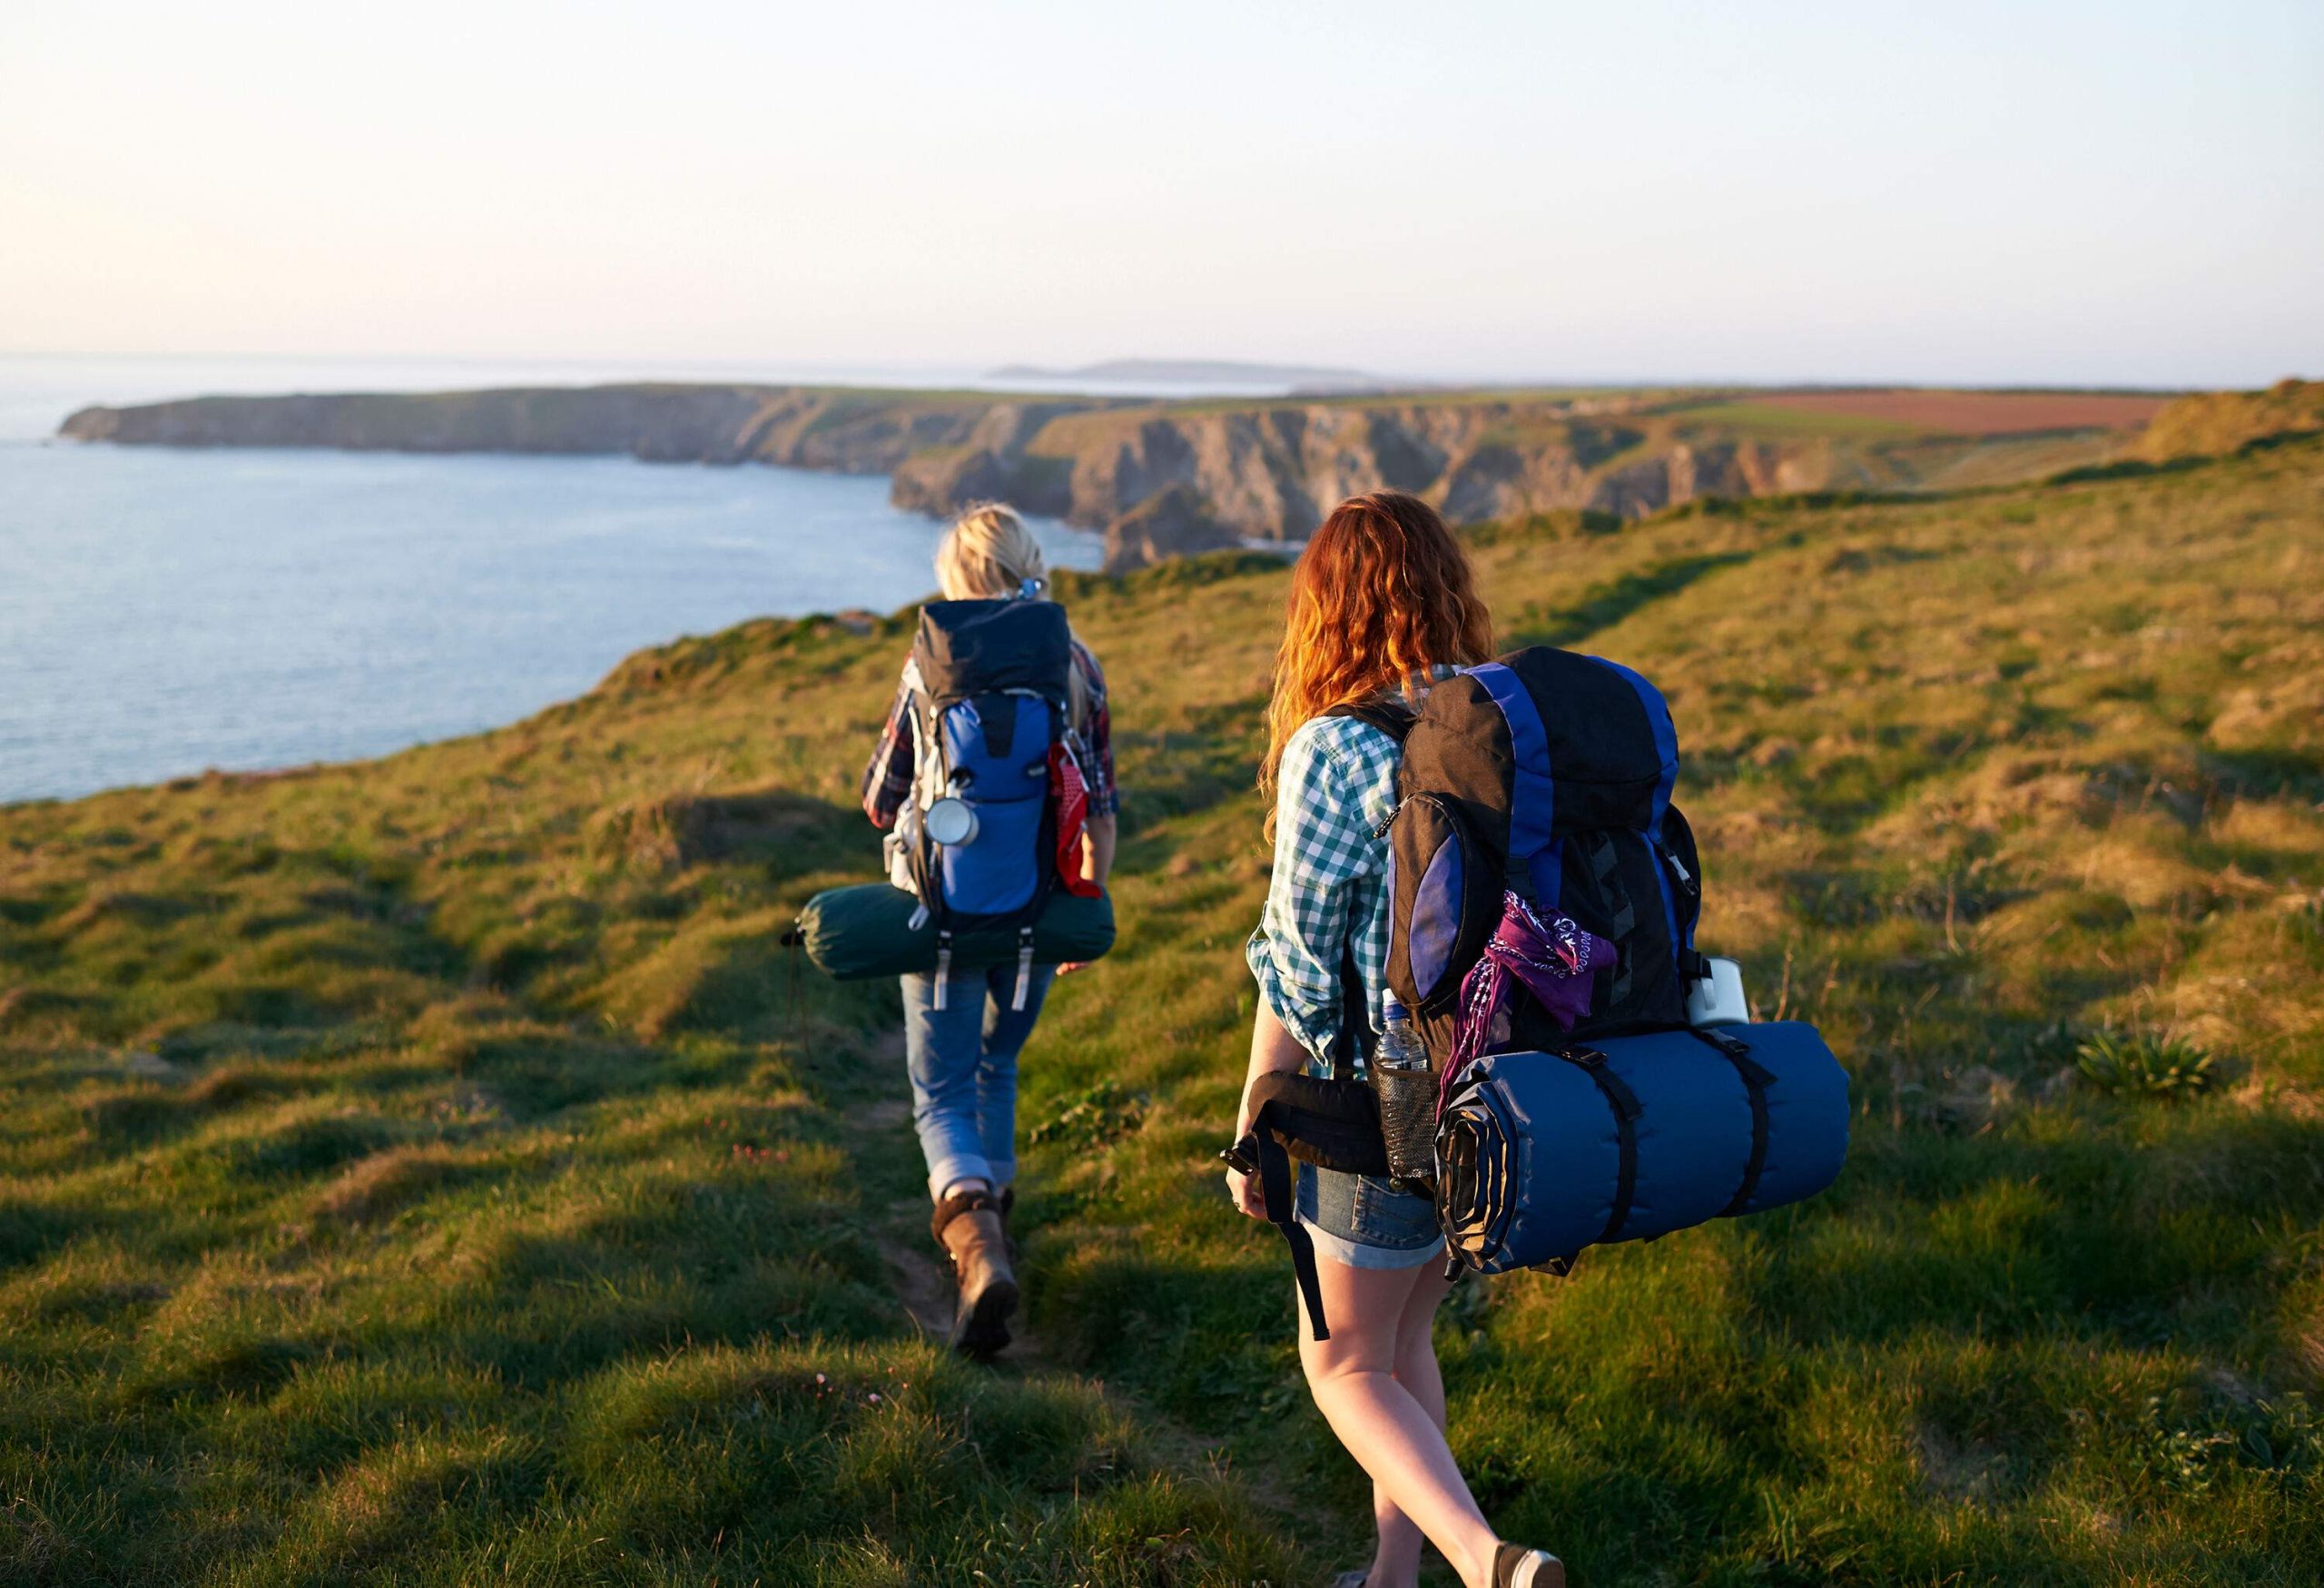 Two hikers carrying camping gear walk down a grassy dirt path with views of the coast in the distance.